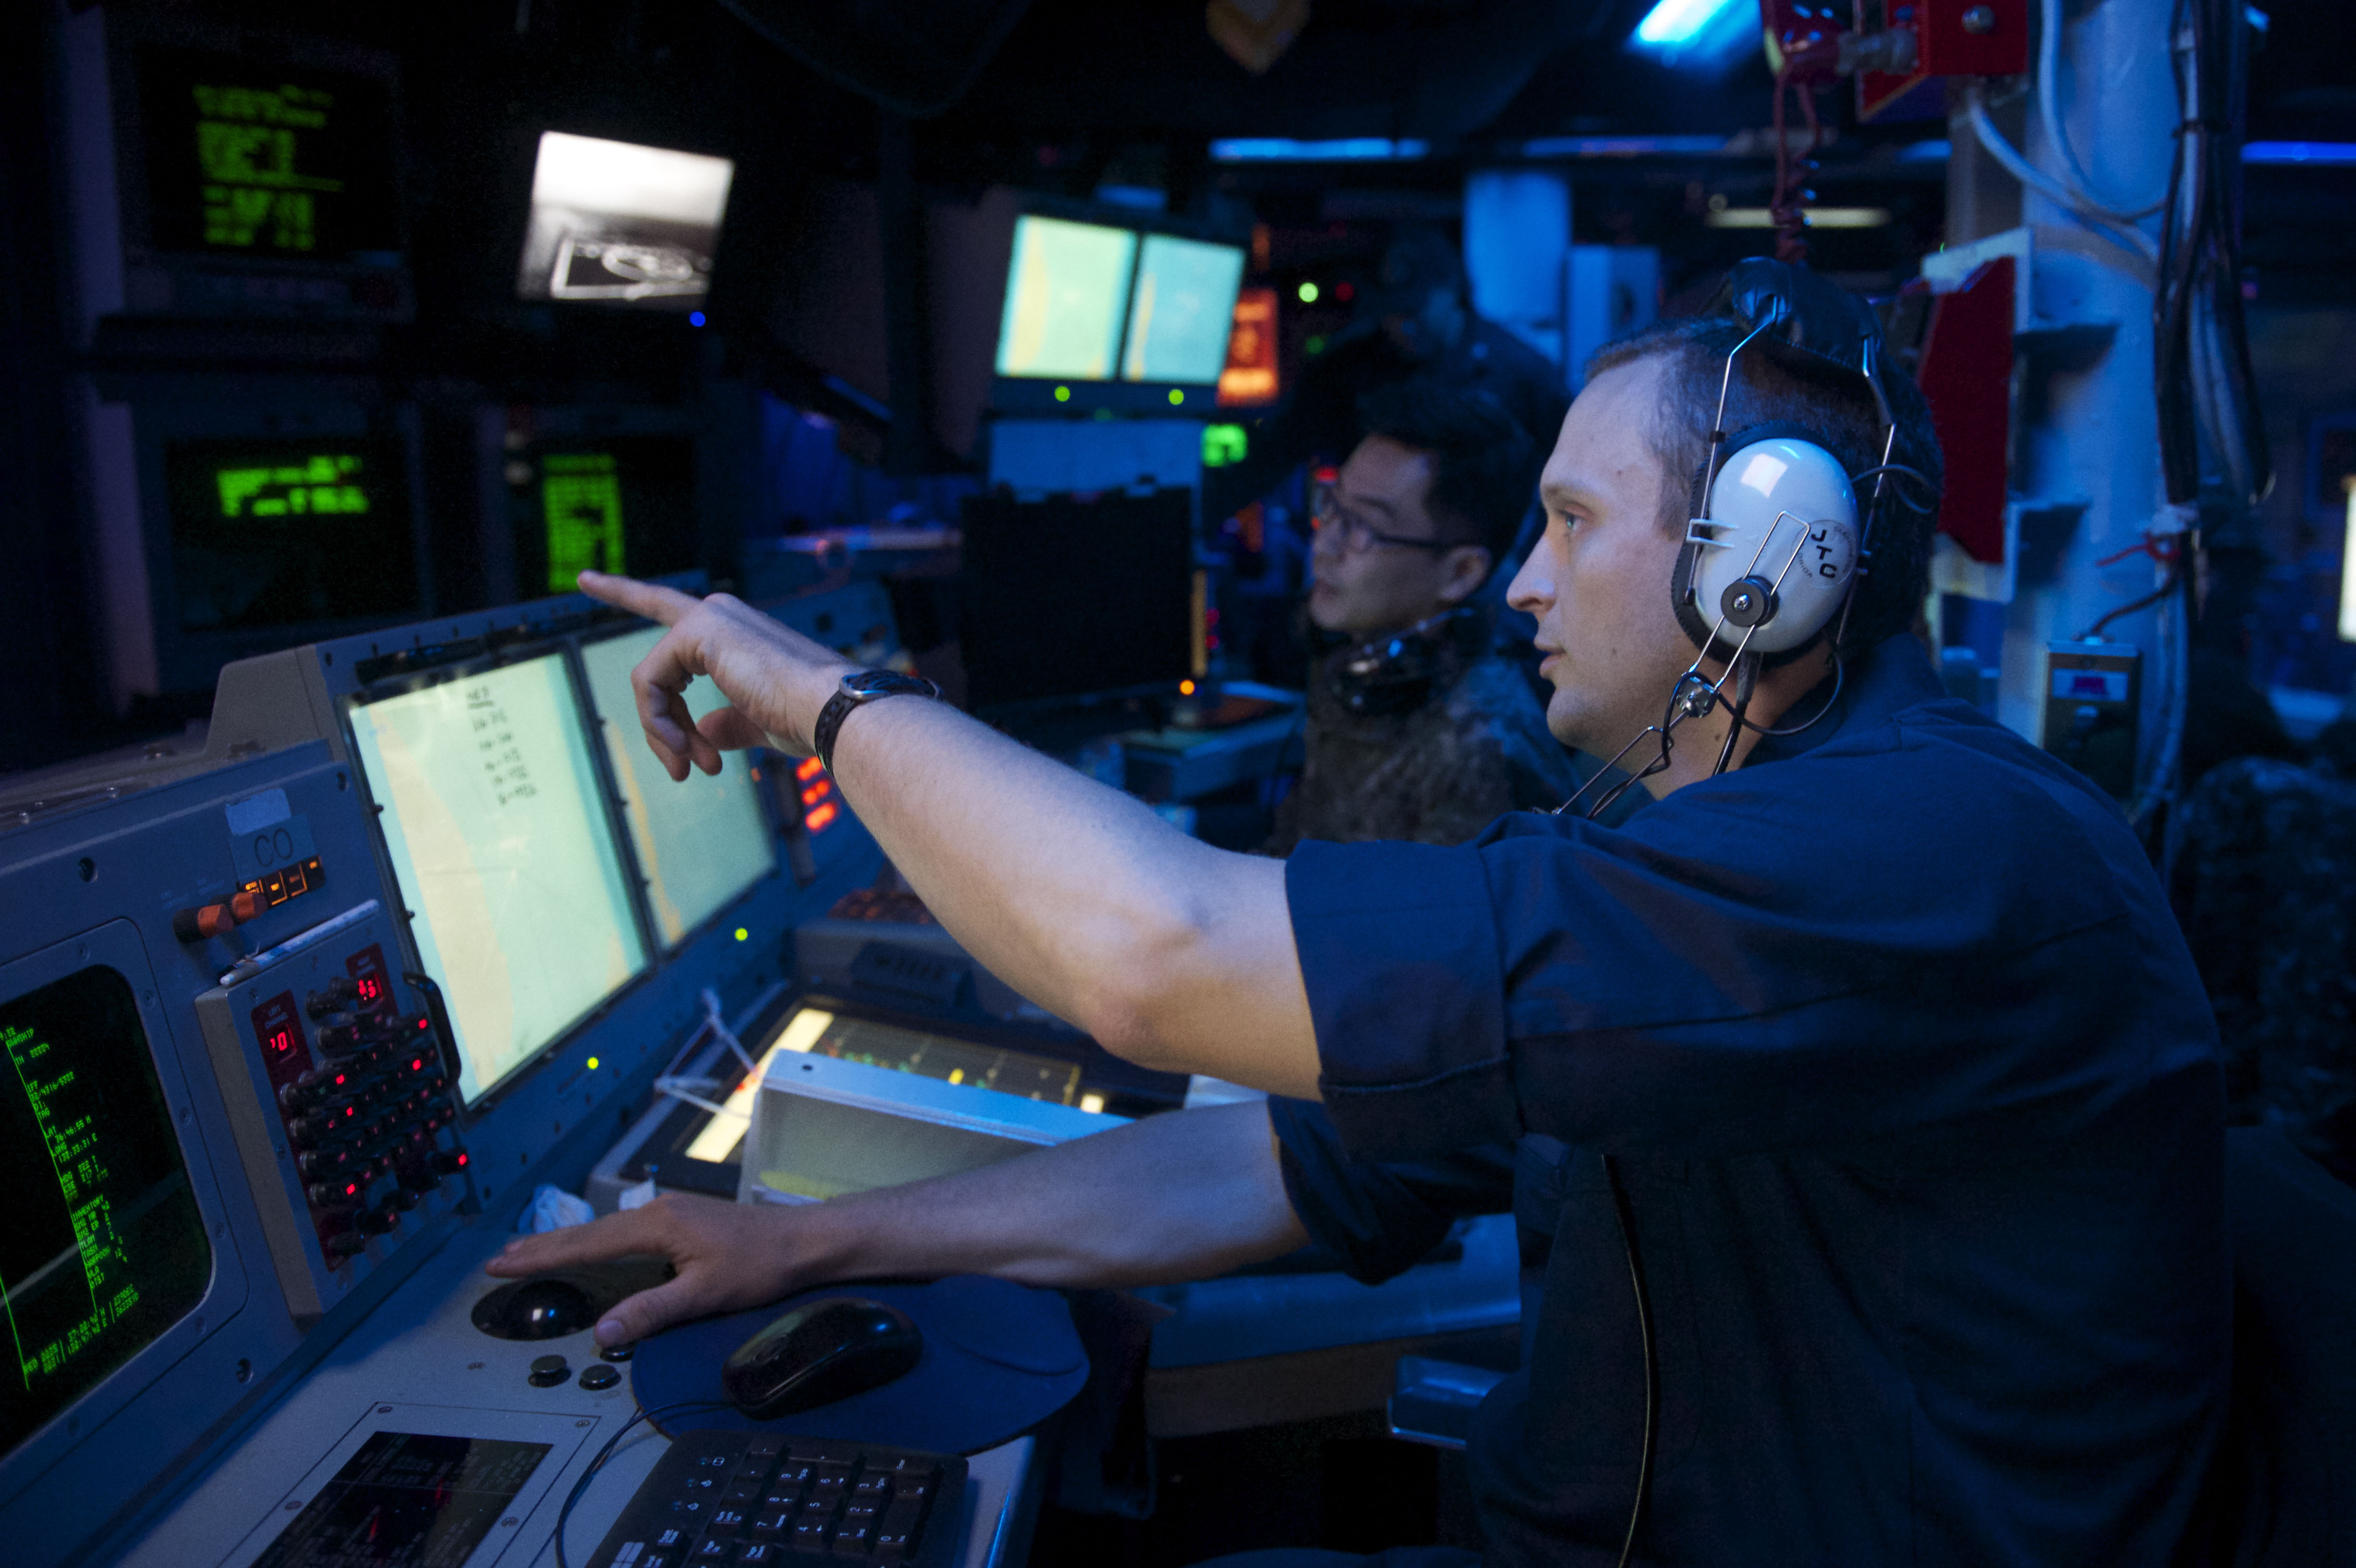 Lt. Richard Ray discusses the bi-lateral U.S. and Republic of Korea Navy's Surface Ship Anti-Submarine Warfare Readiness and Effectiveness Measure (SHAREM) exercise with Lt. Hyeoung Seok Noh, Republic of Korea Navy, in the combat information center aboard USS John S. McCain (DDG-56) on June 3, 2014. US Navy Photo